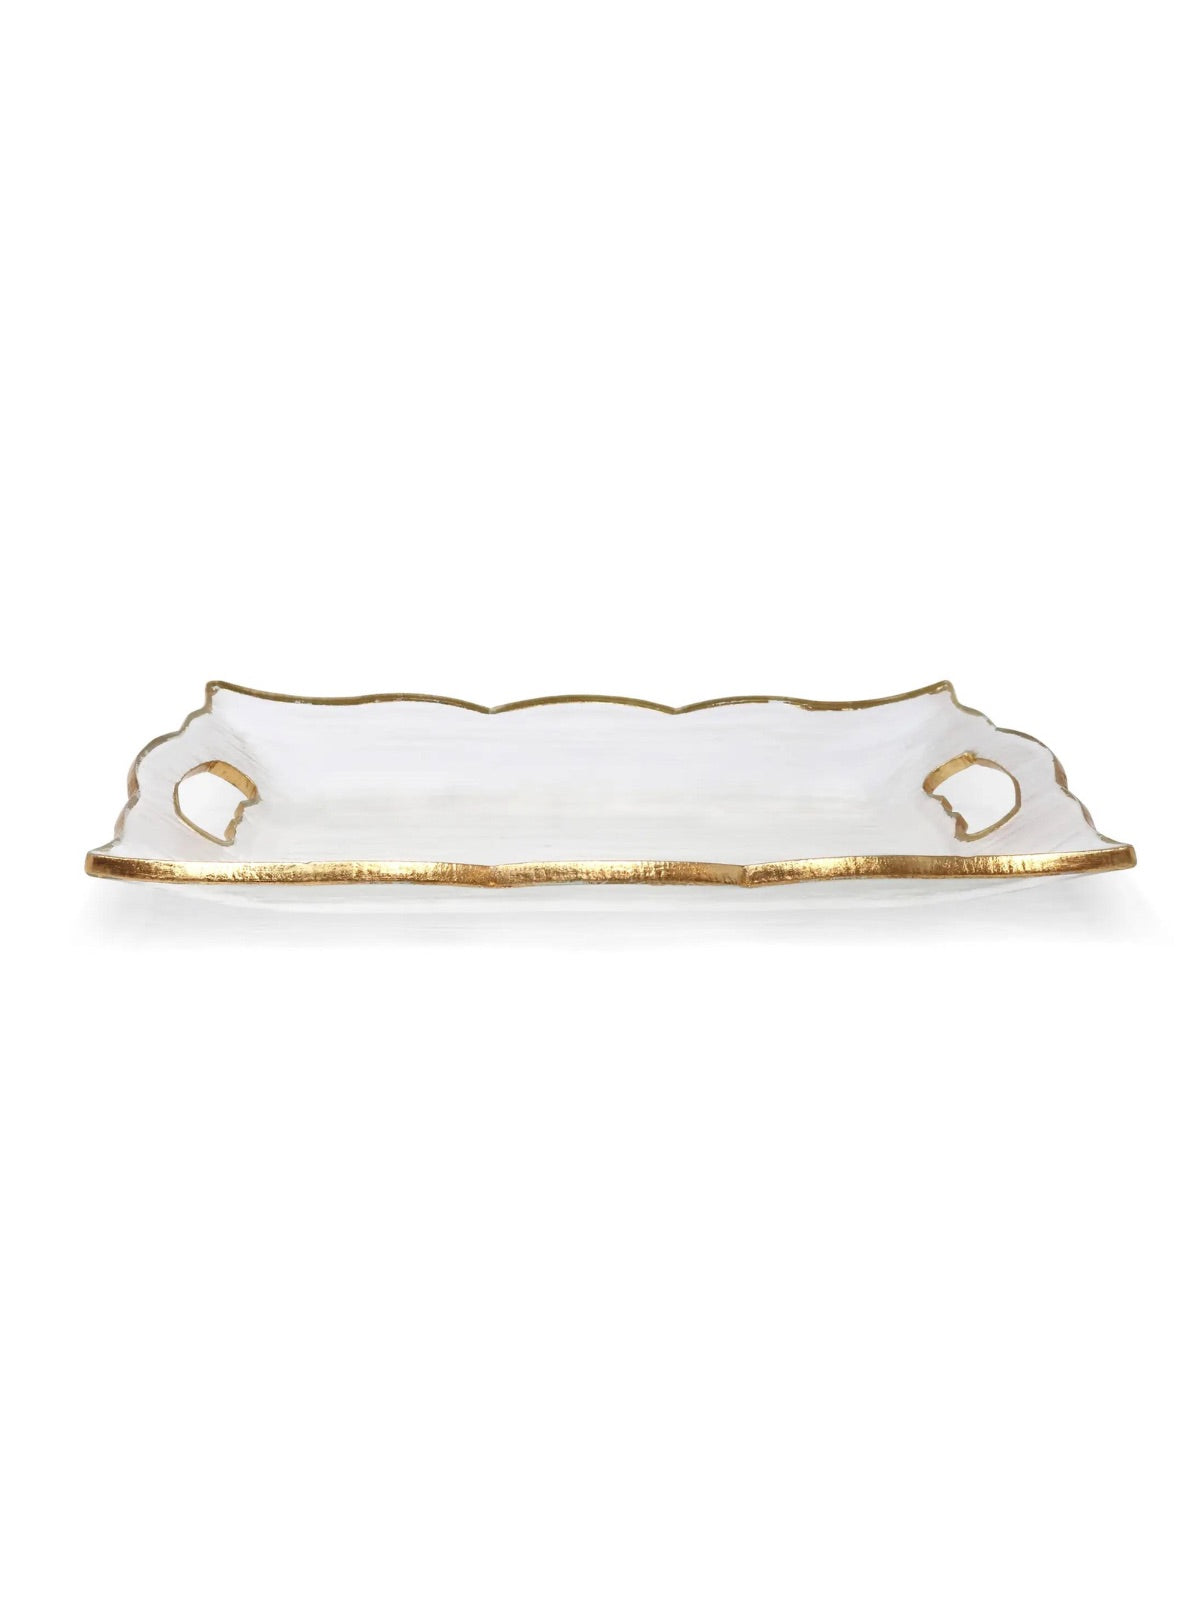 Rectangular Glass Tray with Handles and Metallic Gold Rim Sold by KYA Home Decor.